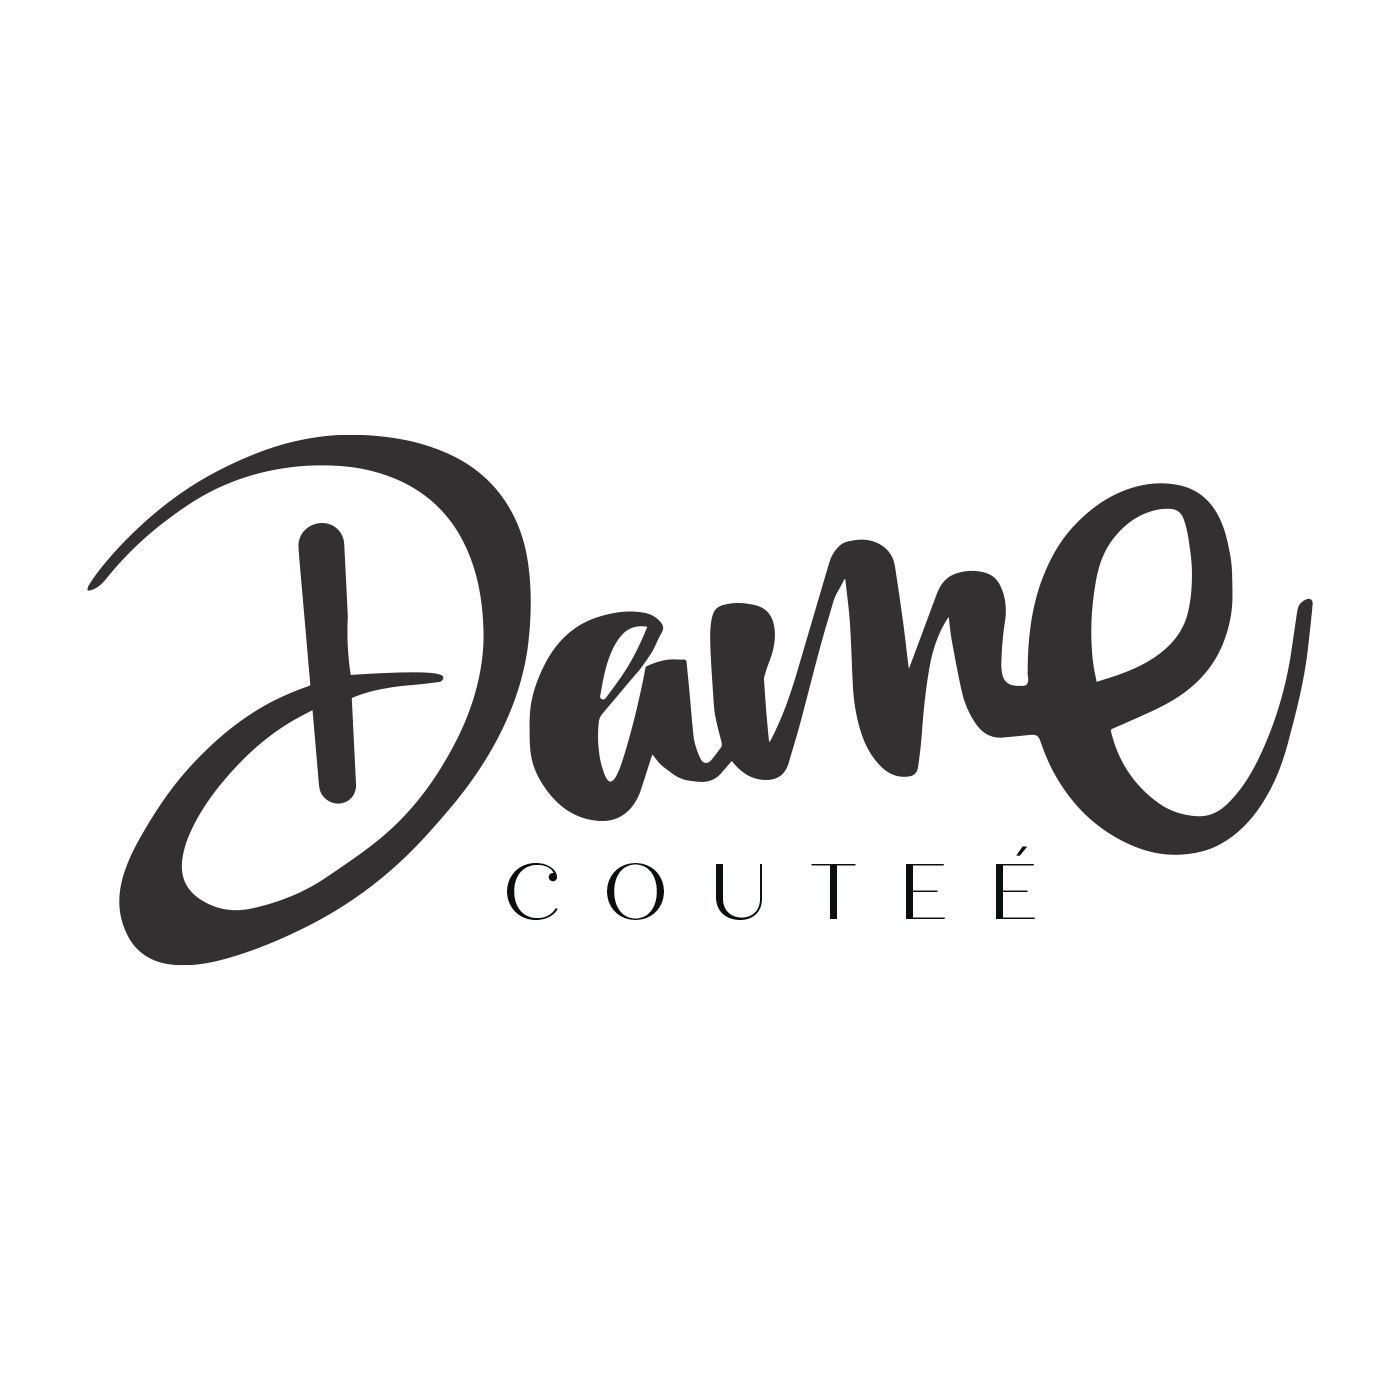 Dame Coutee